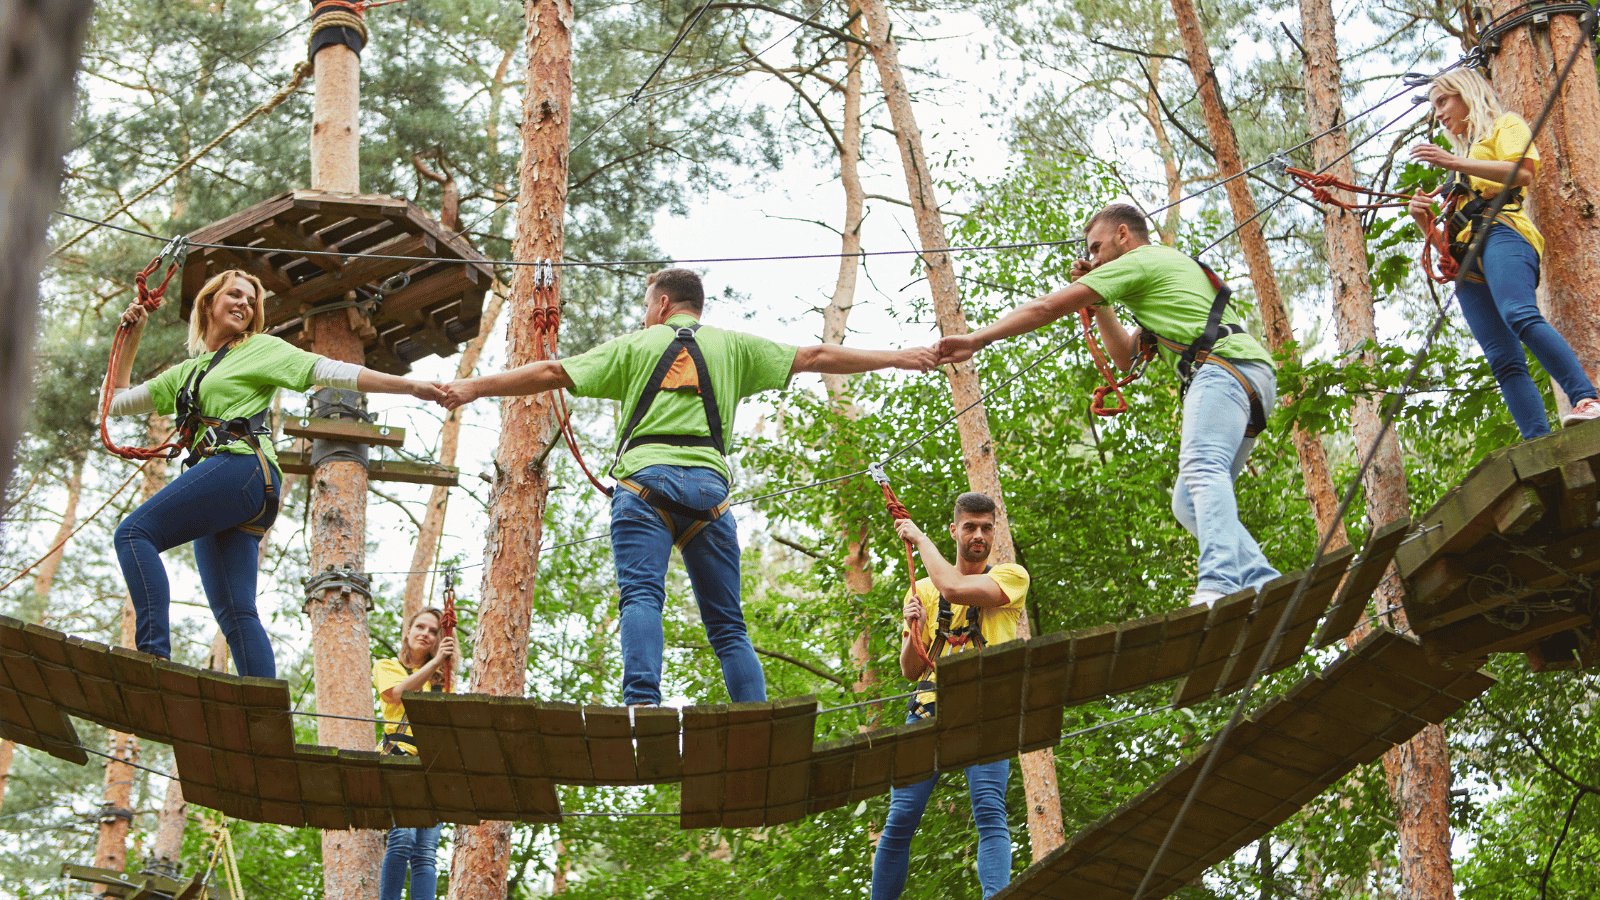 Hosts Global | Team Building Ropes Course